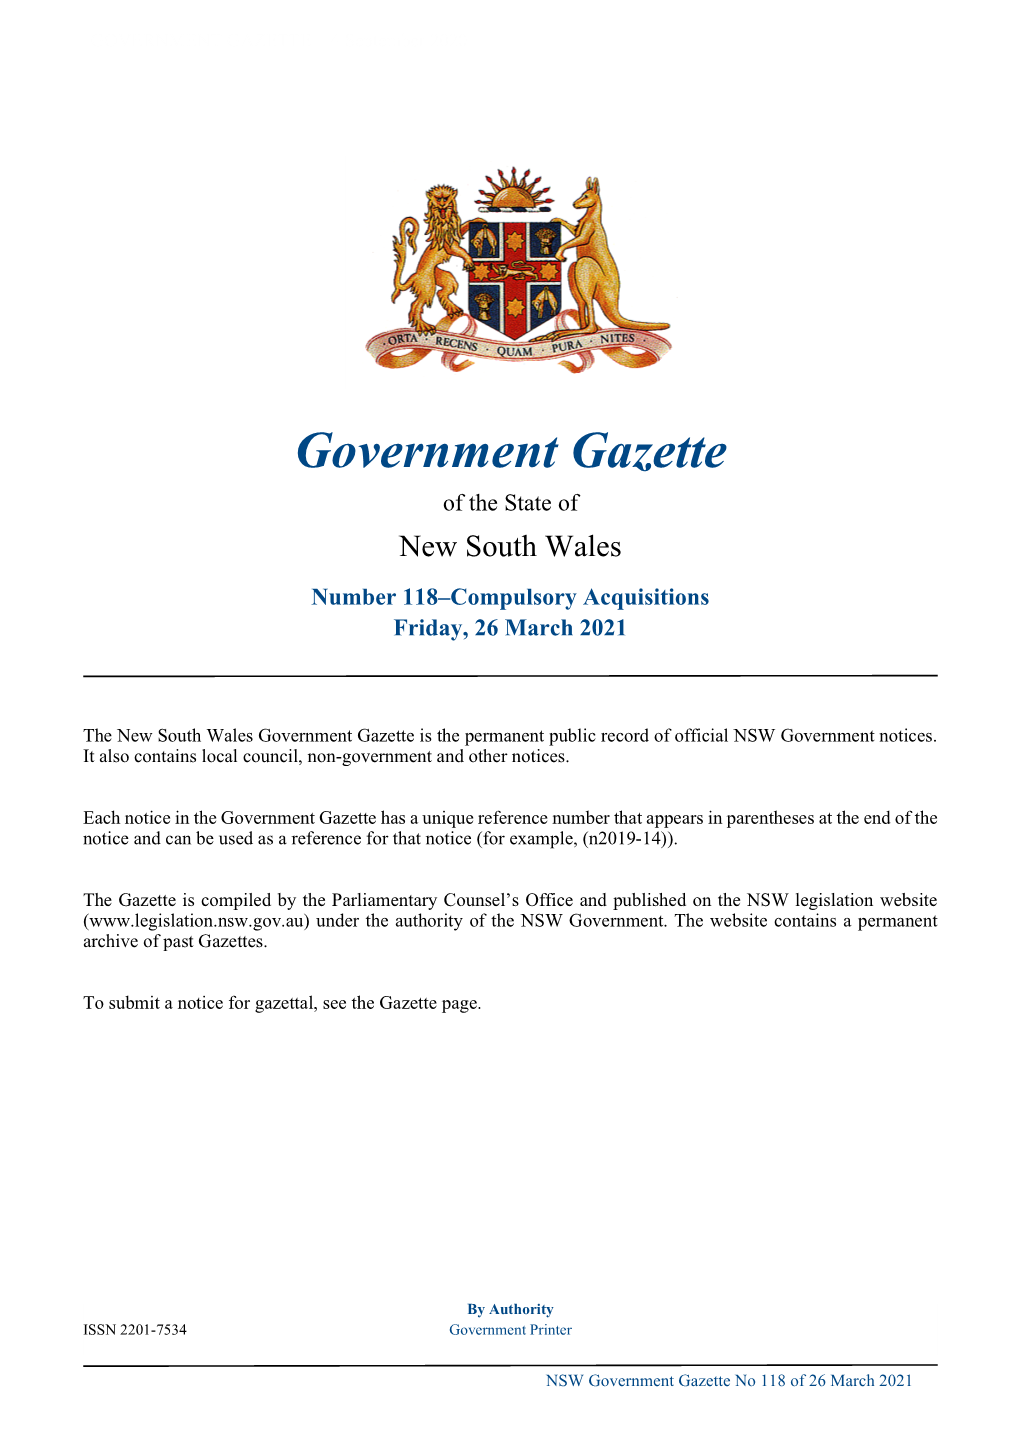 Government Gazette No 118 of Friday 26 March 2021